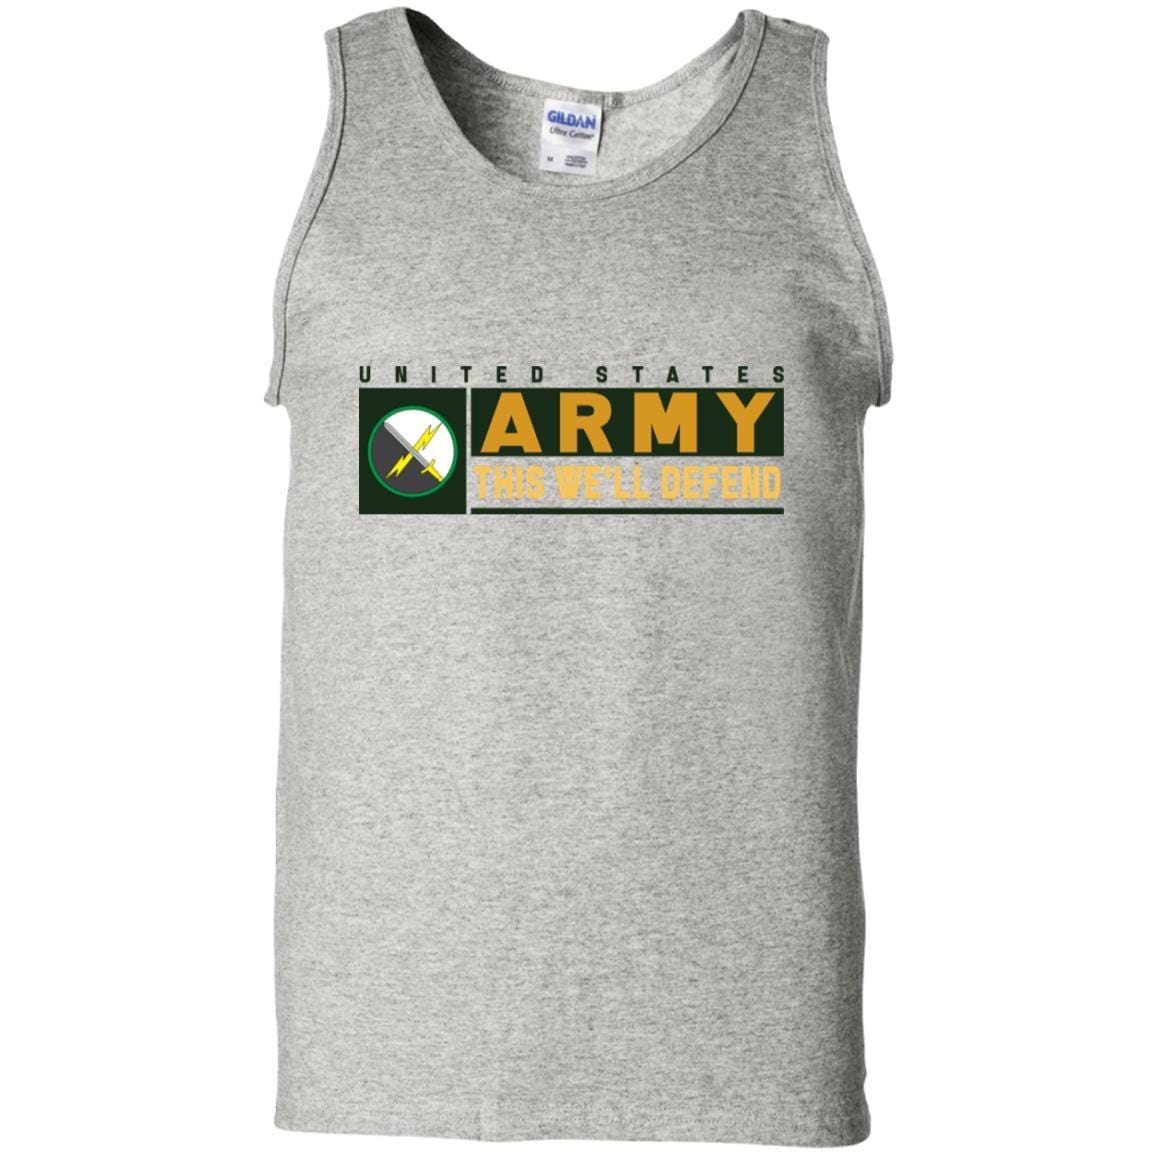 US Army 1ST INFORMATION OPERATIONS COMMAND- This We'll Defend T-Shirt On Front For Men-TShirt-Army-Veterans Nation